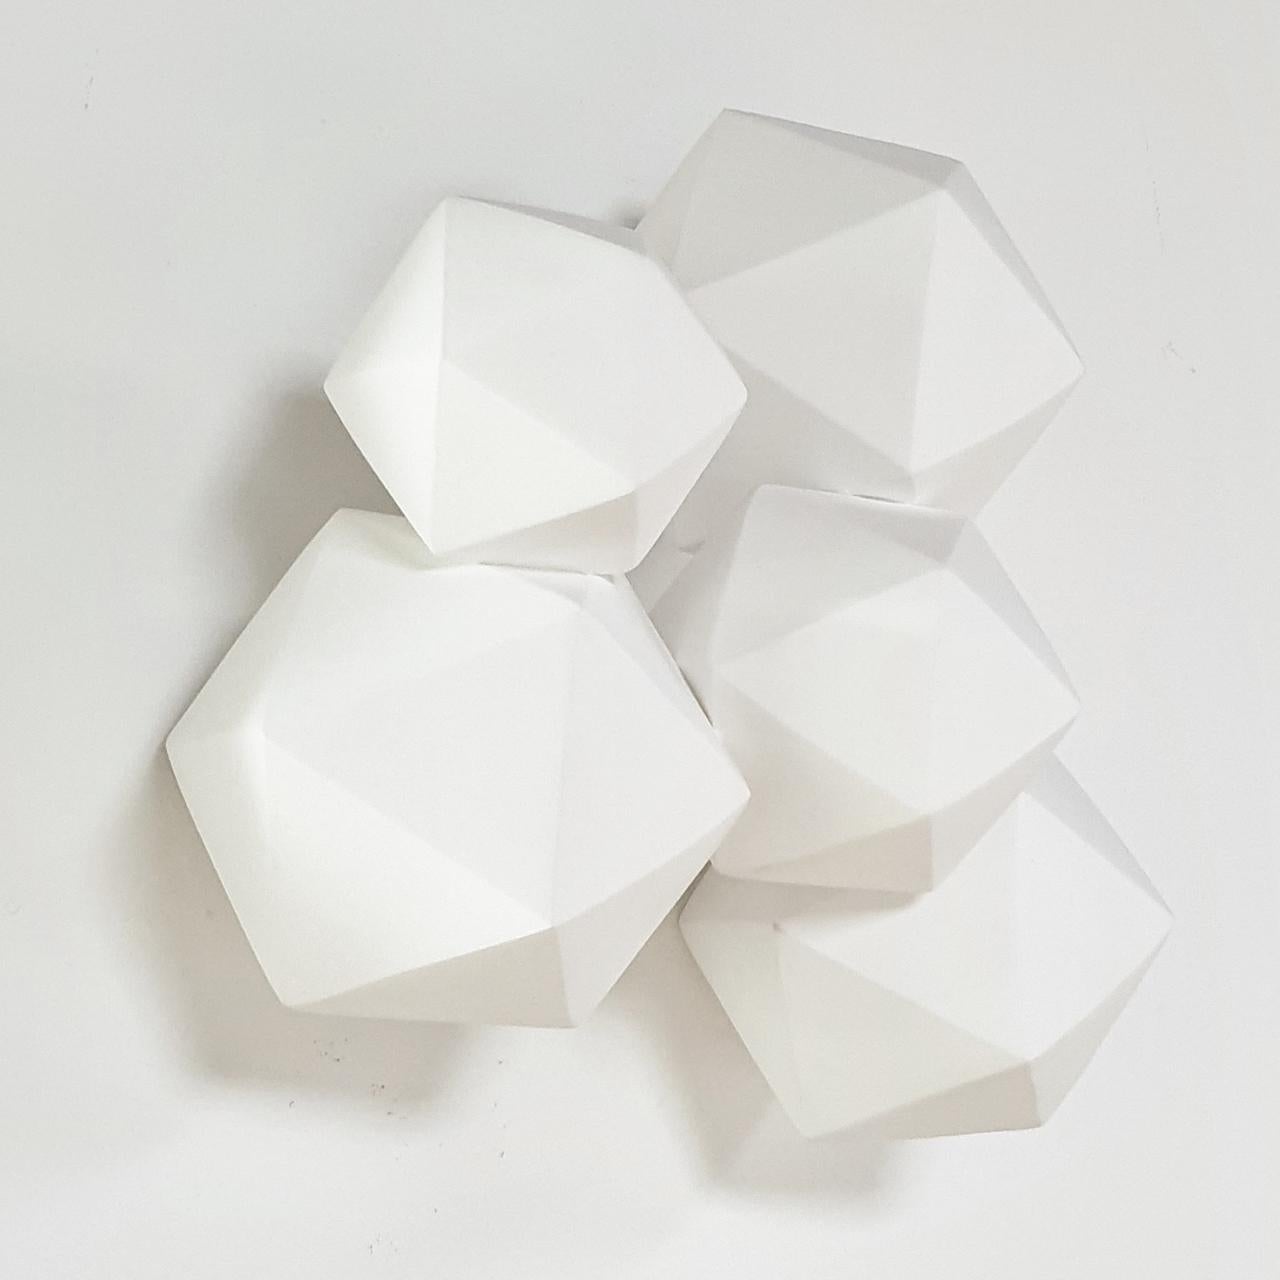 Icosahedron 5 - contemporary modern abstract geometric ceramic wall sculpture - Contemporary Sculpture by Mo Cornelisse